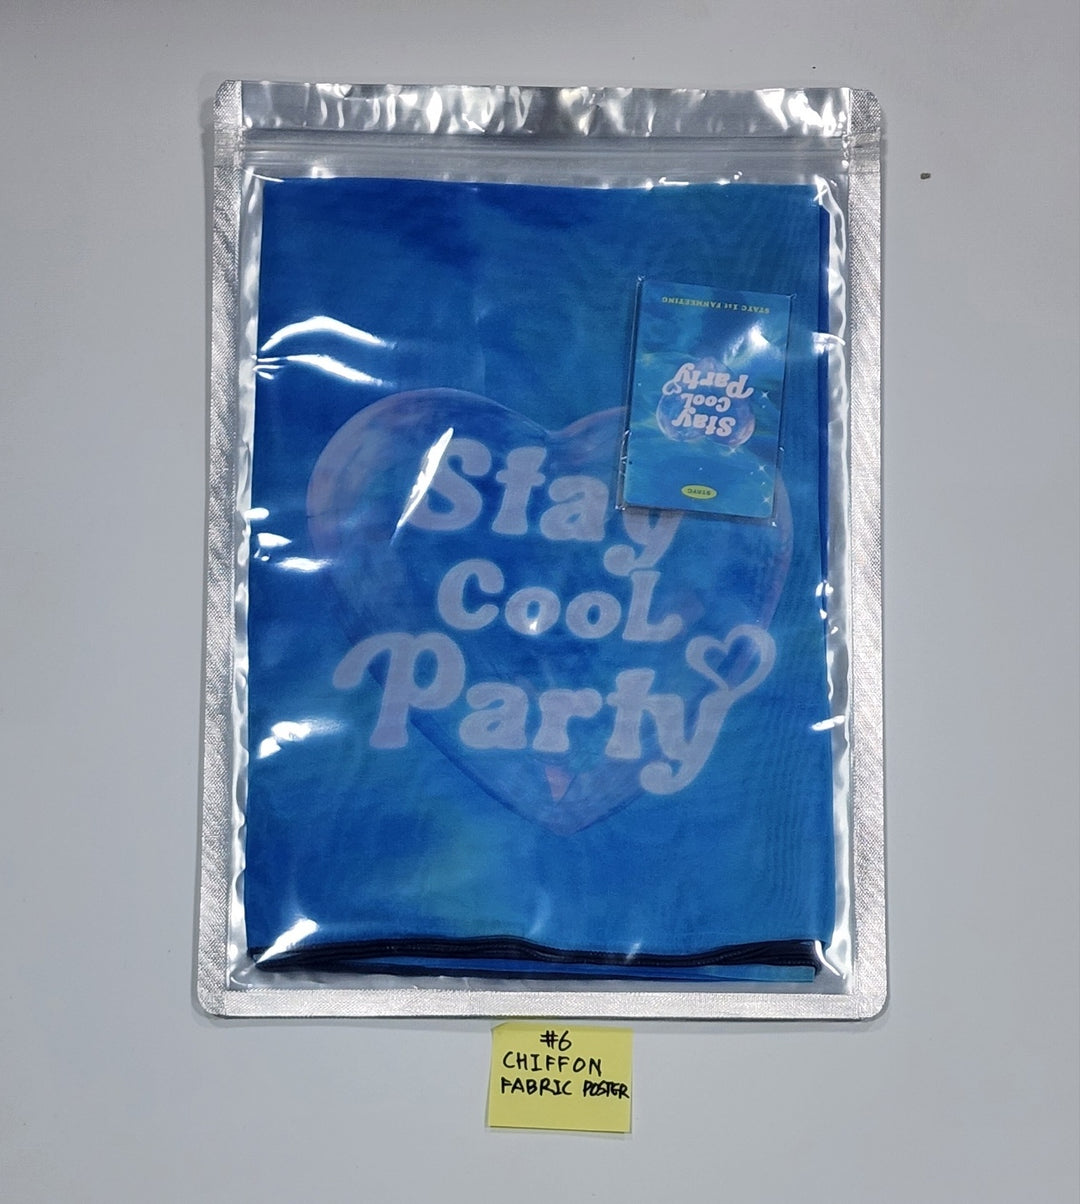 STAYC "Stay cool party" - 공식 MD (we need love Badge, 쉬폰포스터, 카드홀더 Key Ring, Stay cool Party Badge, TYVEK ECO BAG, Profile &amp; ID Card Set)